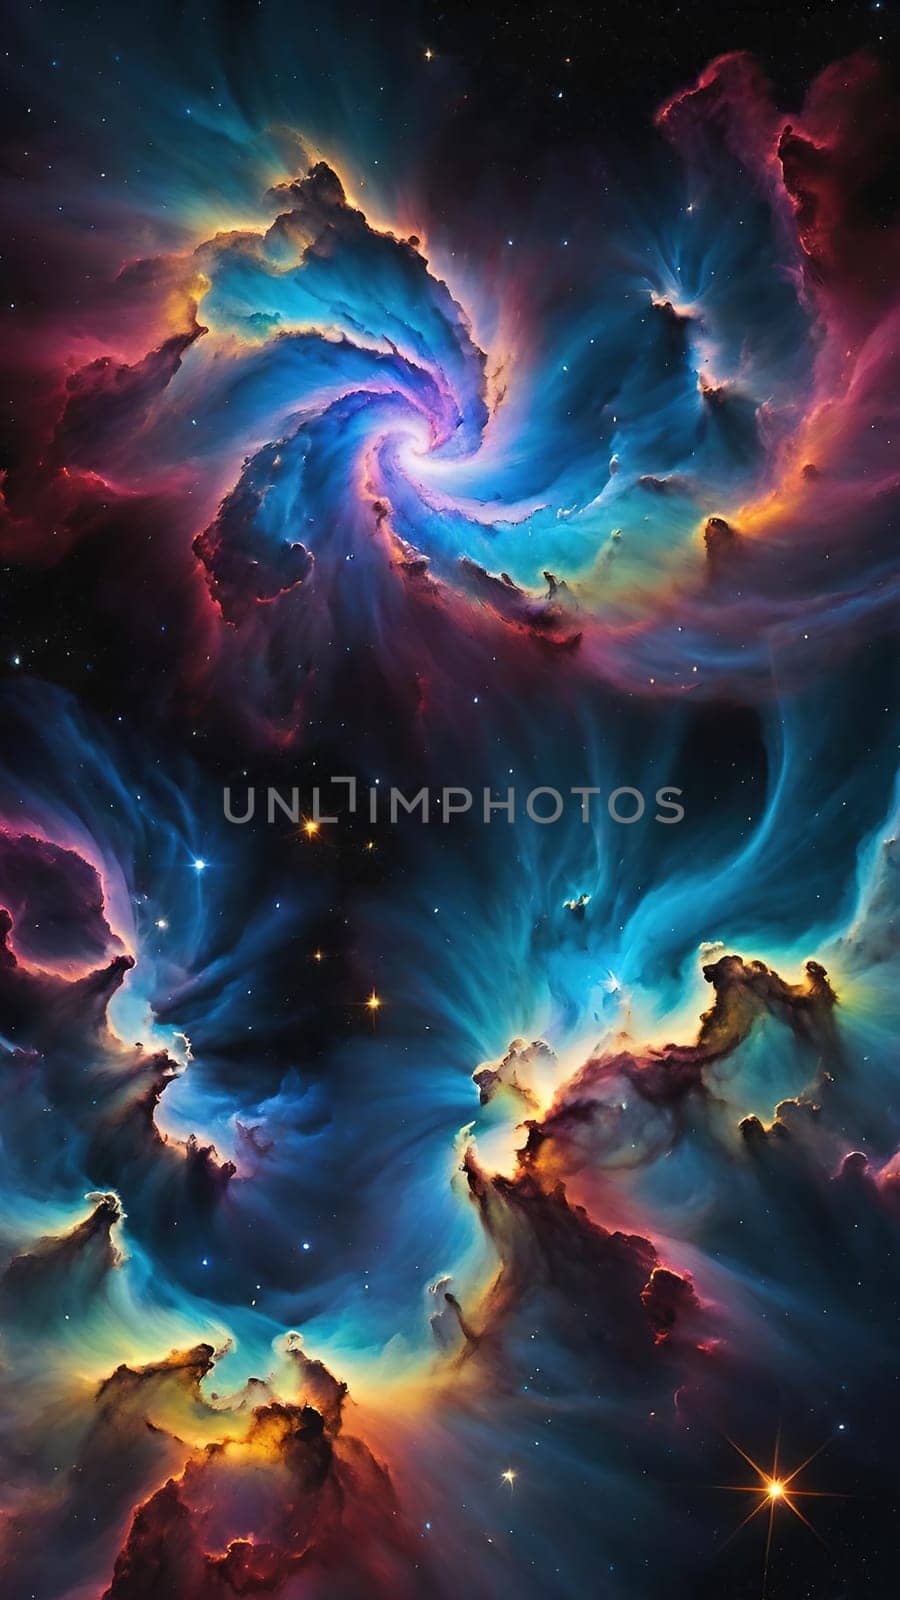 Galaxy and nebula, computer generated abstract background.Cosmic space background with nebulae and stars.Galaxy in outer space. Colorful nebula. Abstract space background with nebula, stars and galaxies. Abstract fractal. Fractal art background for creative design. Decoration for wallpaper, desktop, poster, cover booklet. Print for clothes, t-shirt. Creative illustration for design.